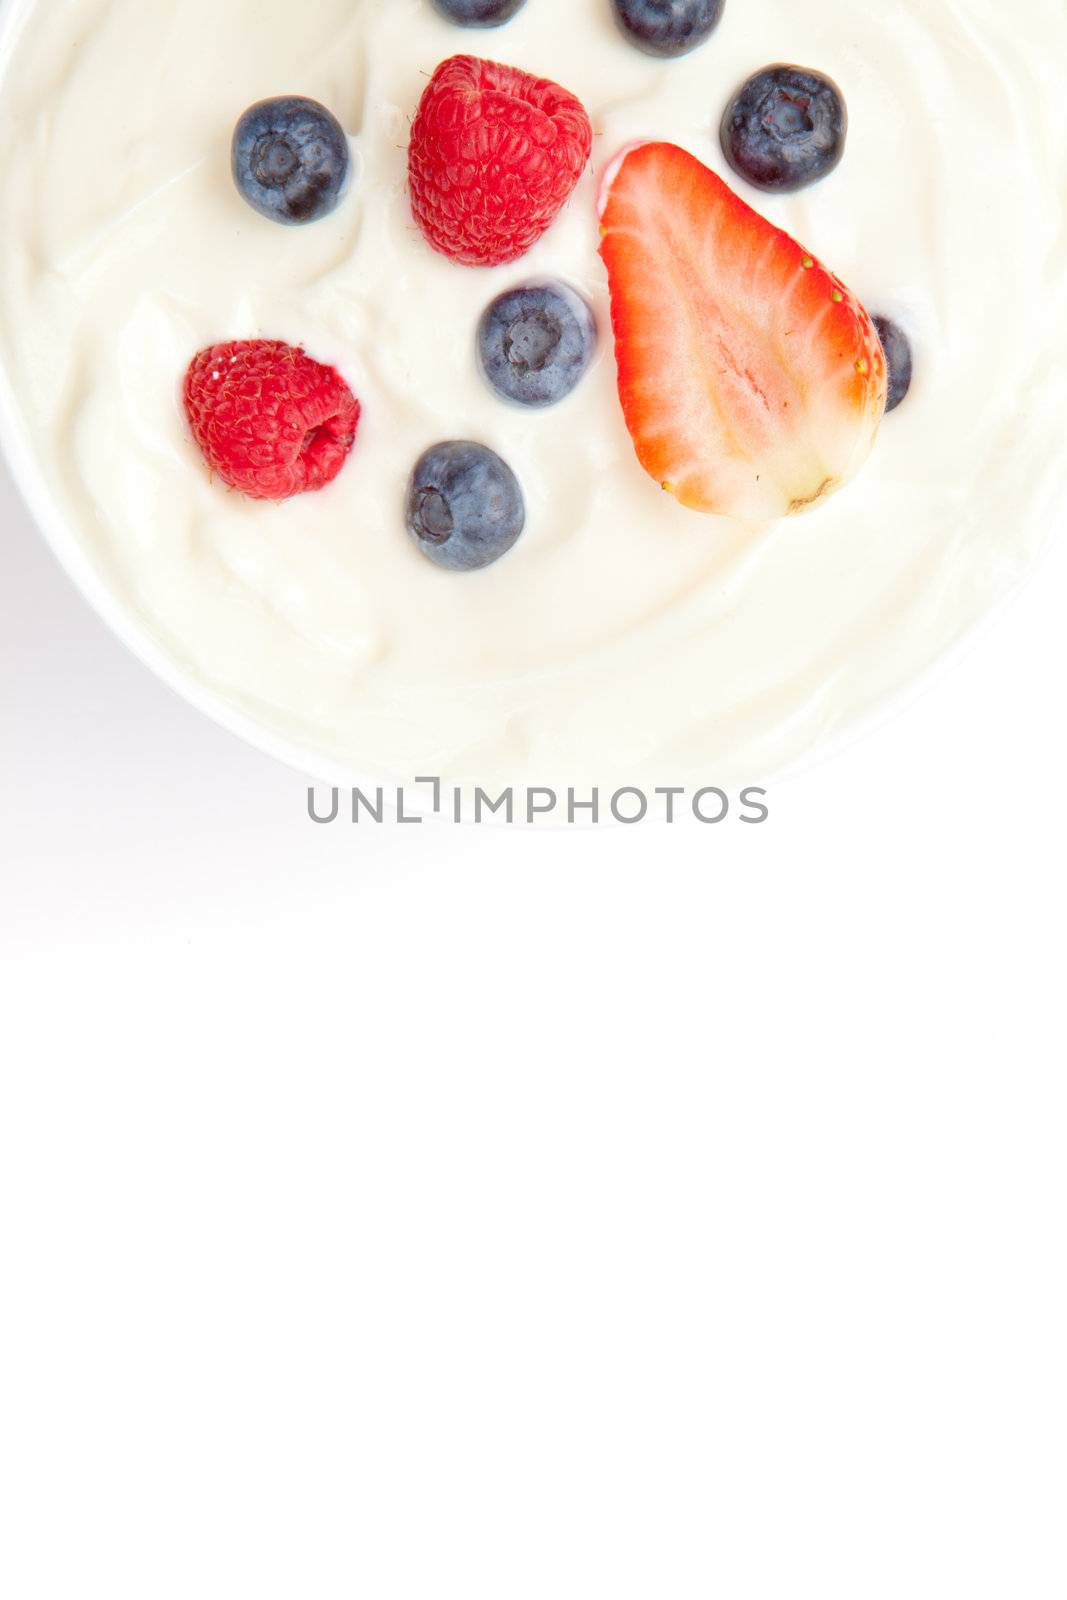 Berries cream against a white background